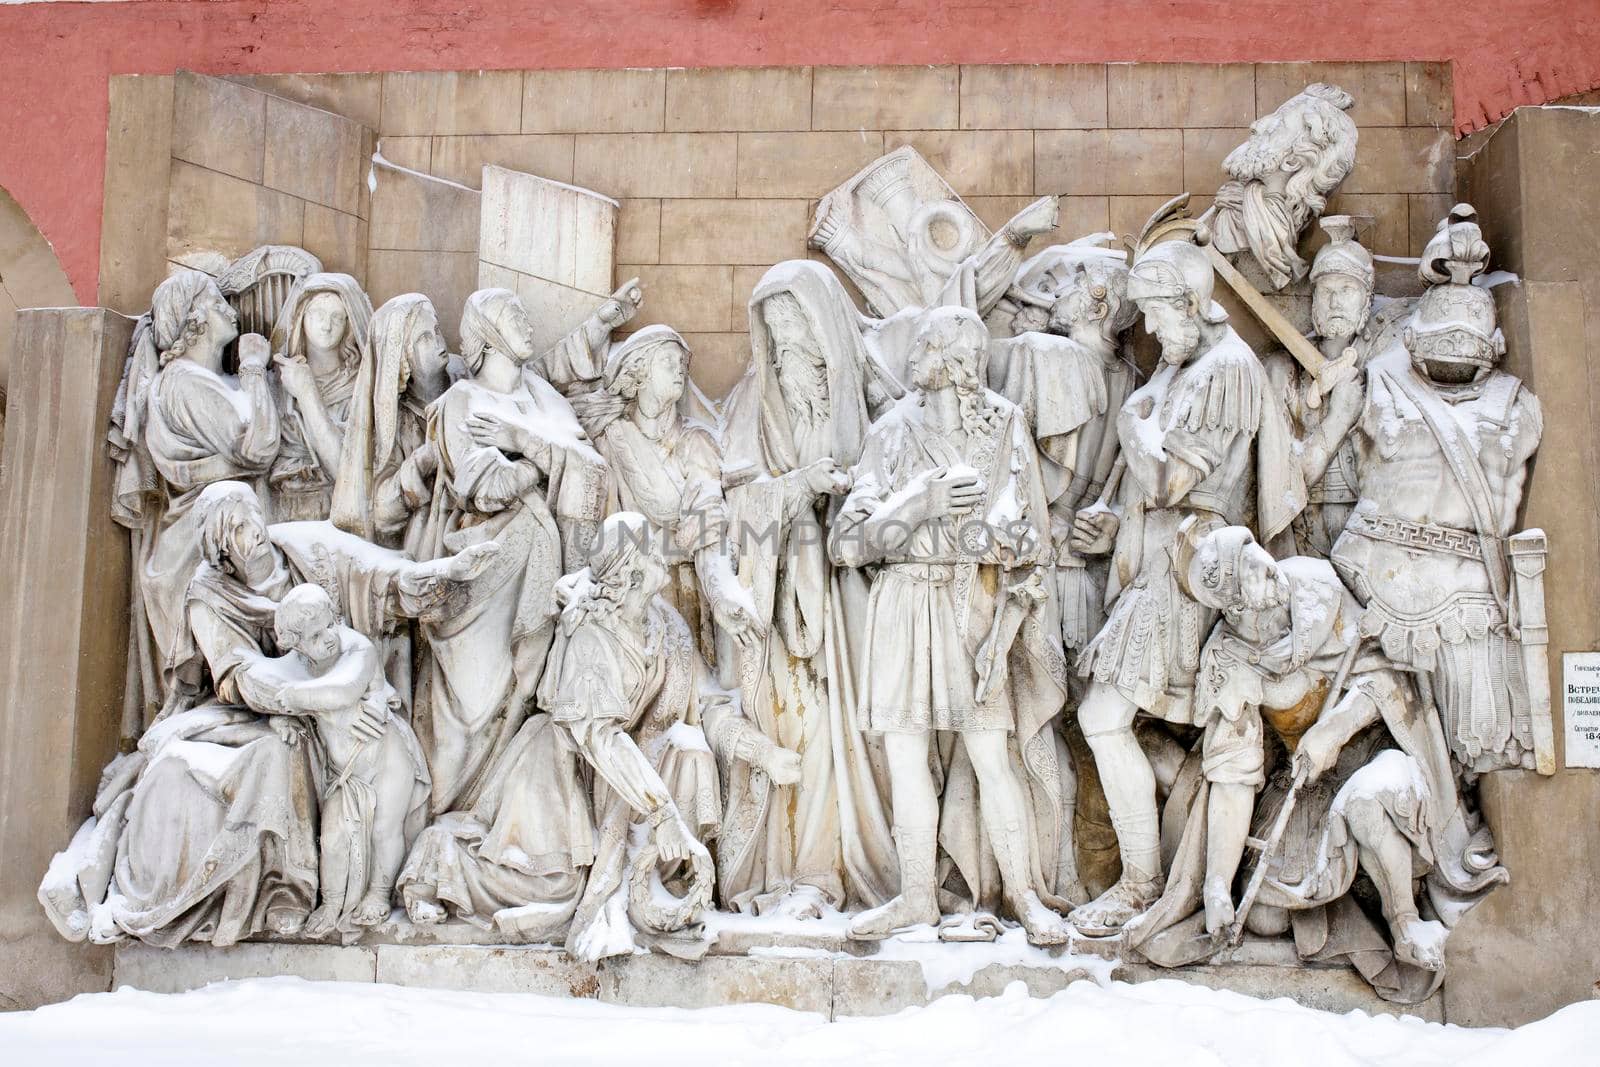 Moscow, Russia - 20 December 2021, bus-relief, David's meeting of defeated Goliath, sculptor A. V. Loganovsky, remains of the ornaments of the old Cathedral of Christ the Savior. Donskoy monastery